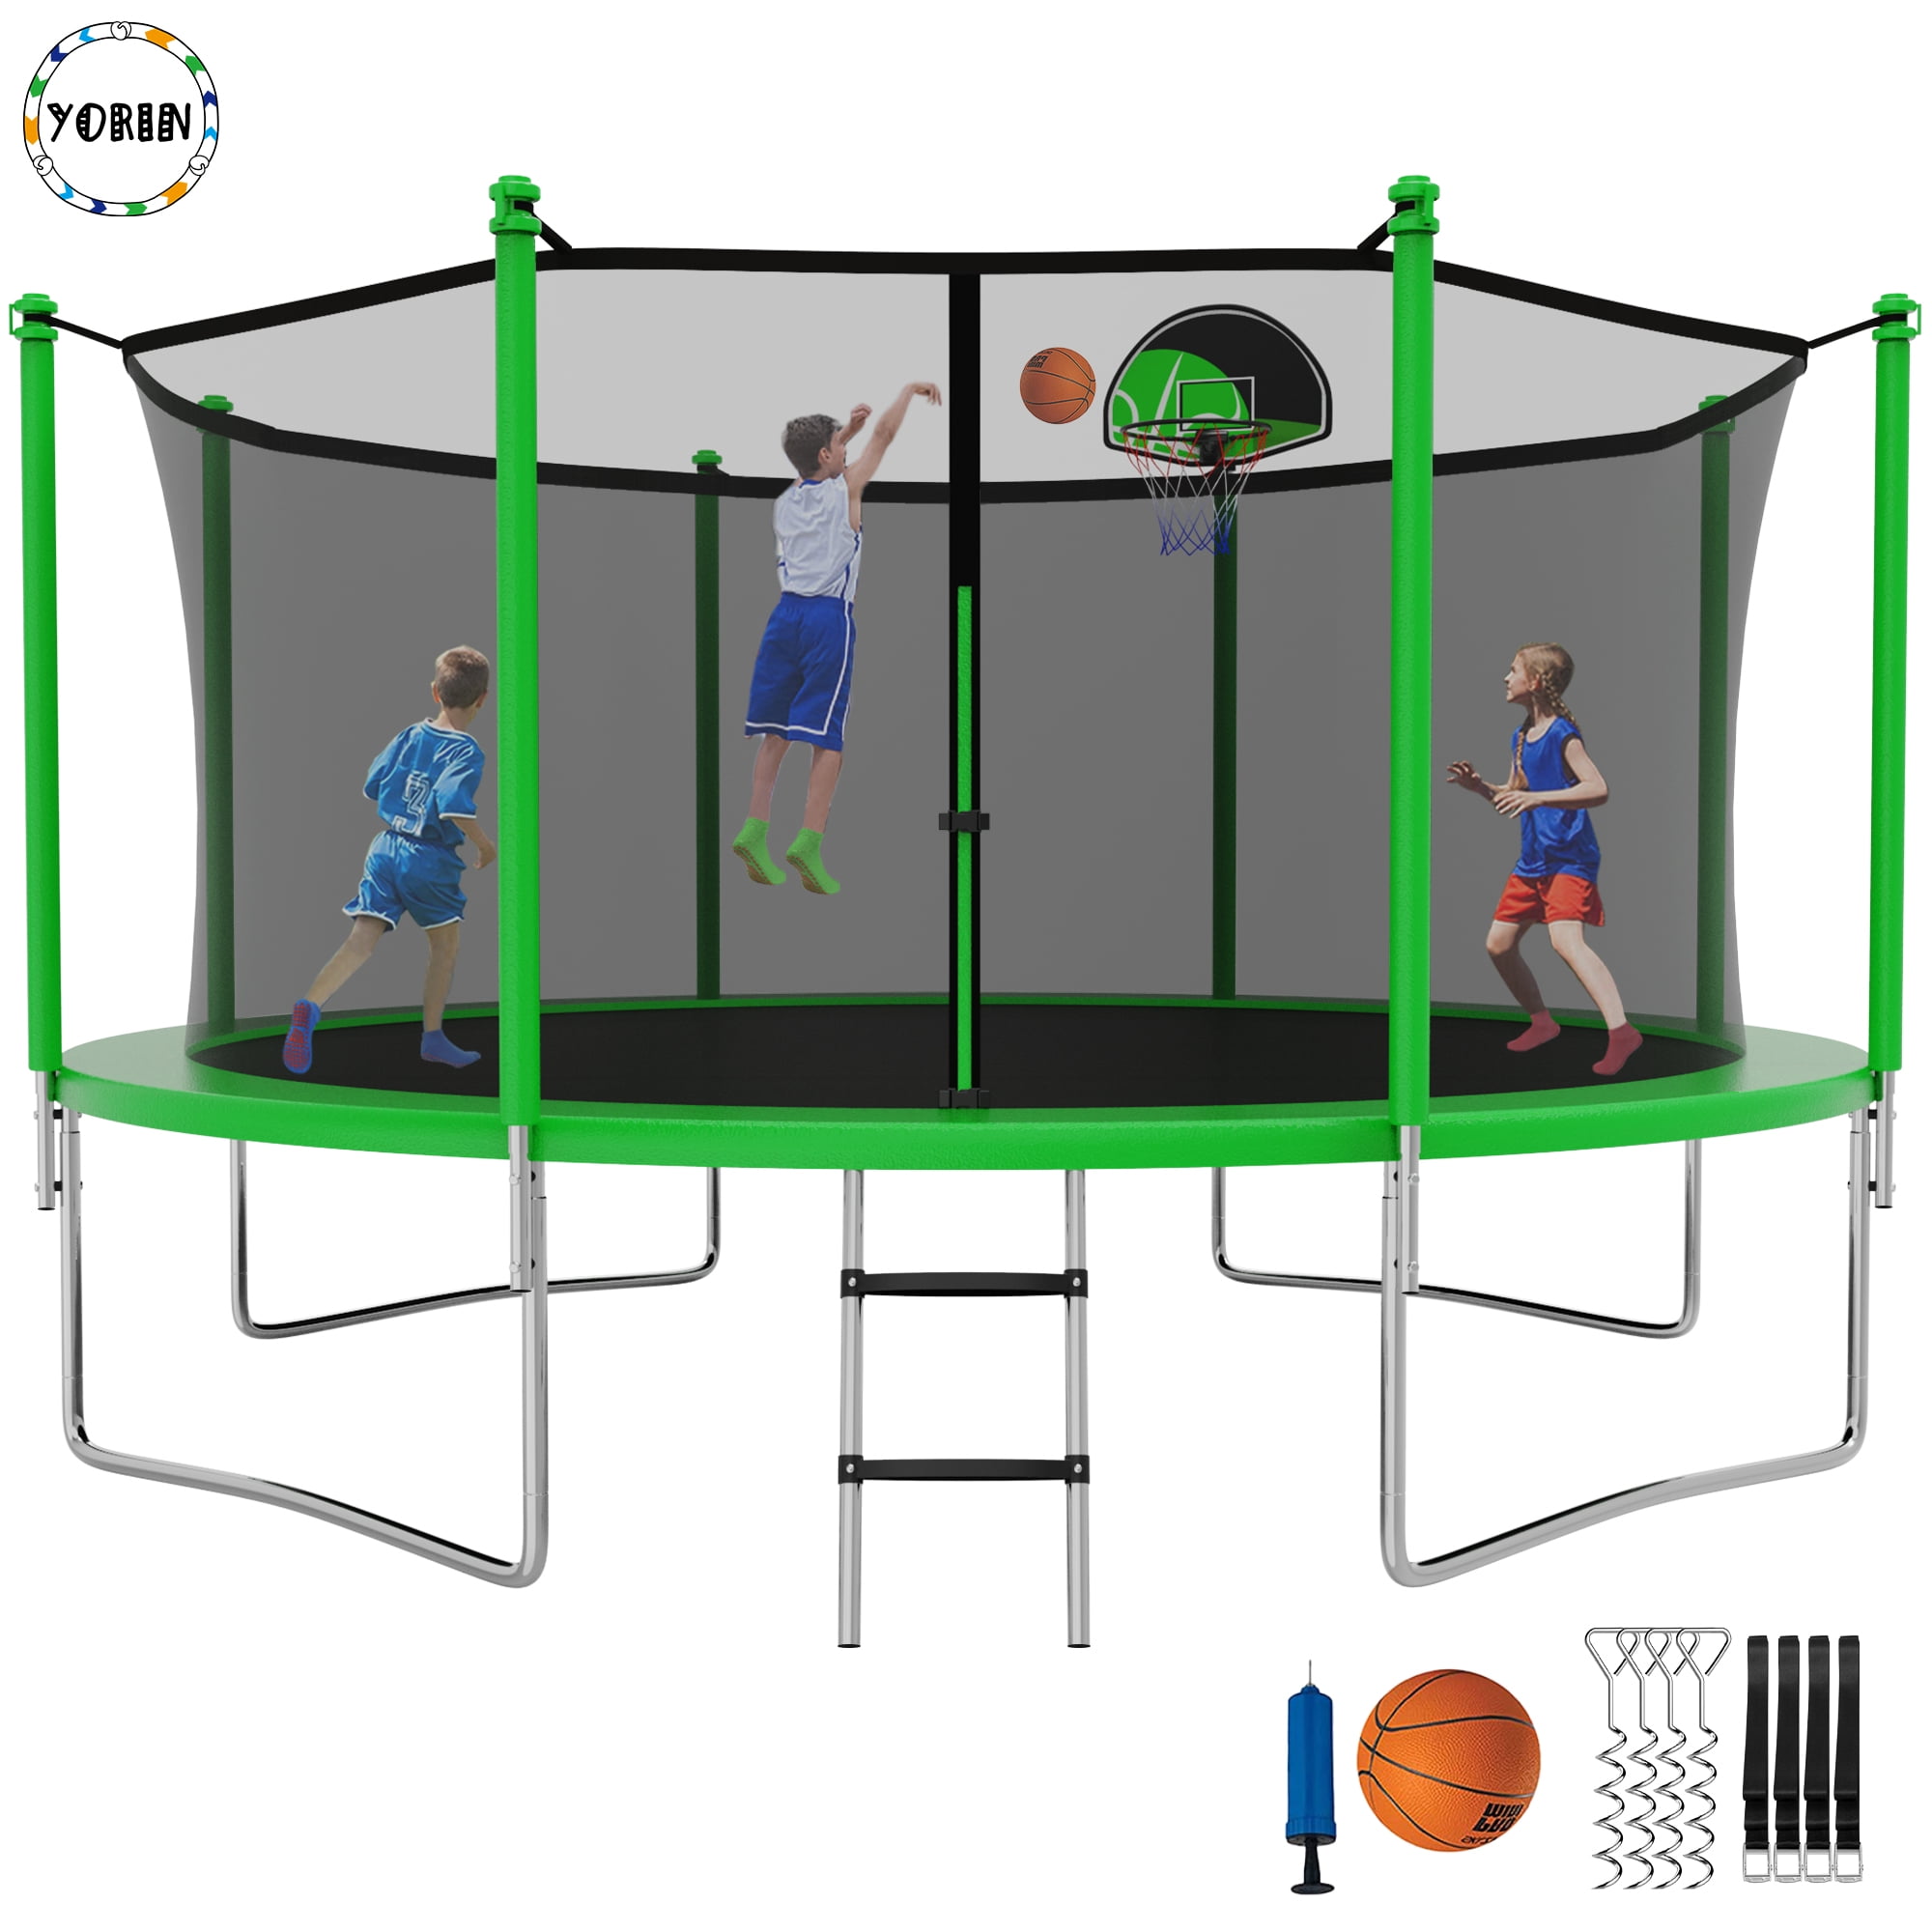 YORIN 1200LBS 12FT 14FT 15FT Trampoline for Kids Adults, Trampoline ...